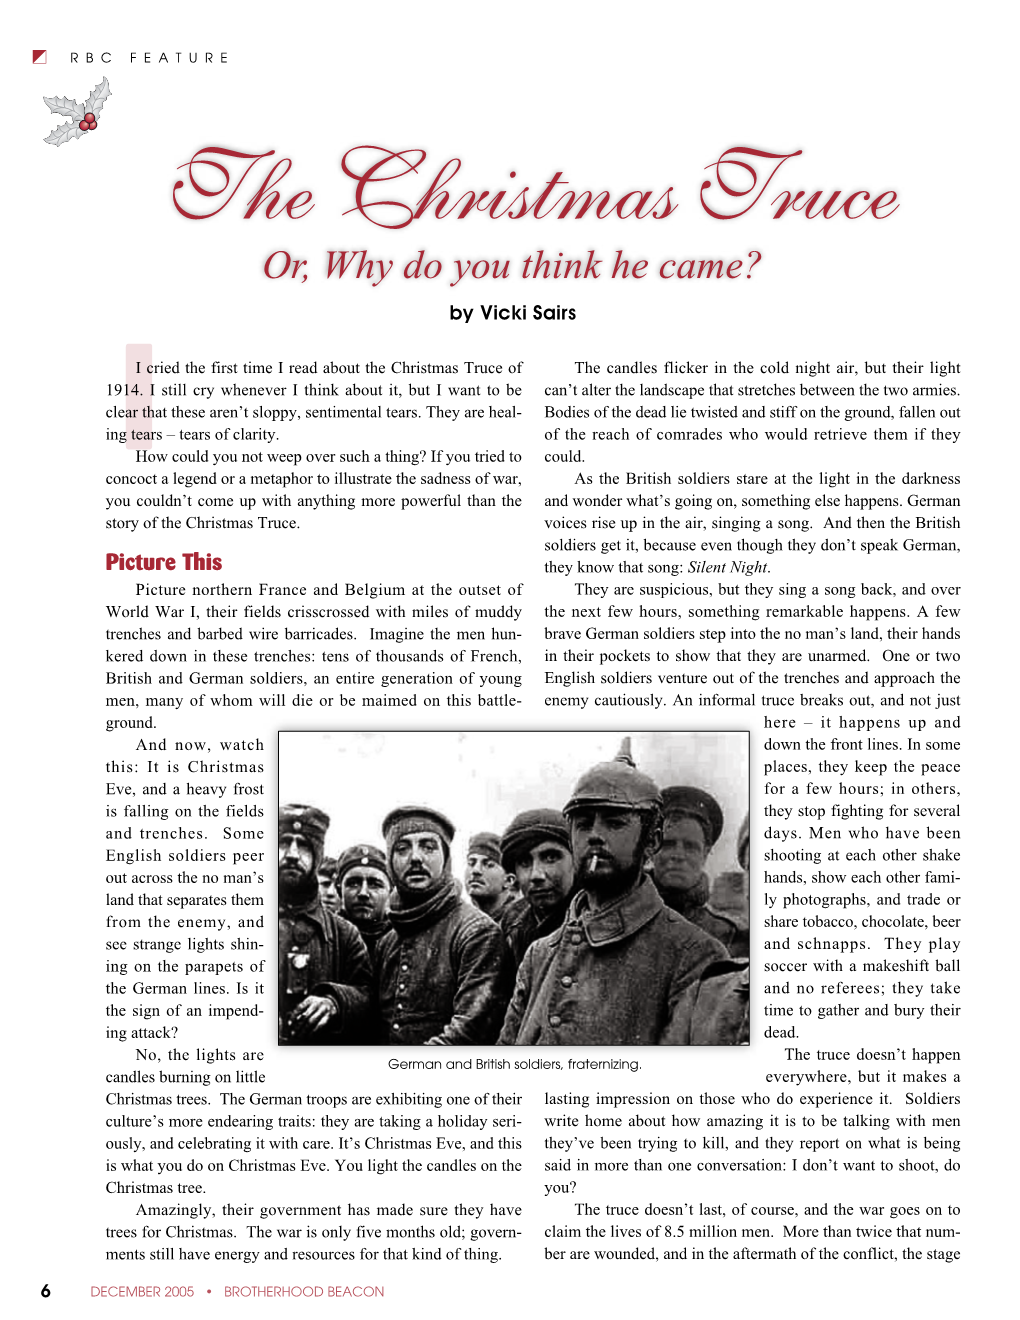 The Christmas Truce Or, Why Do You Think He Came? by Vicki Sairs